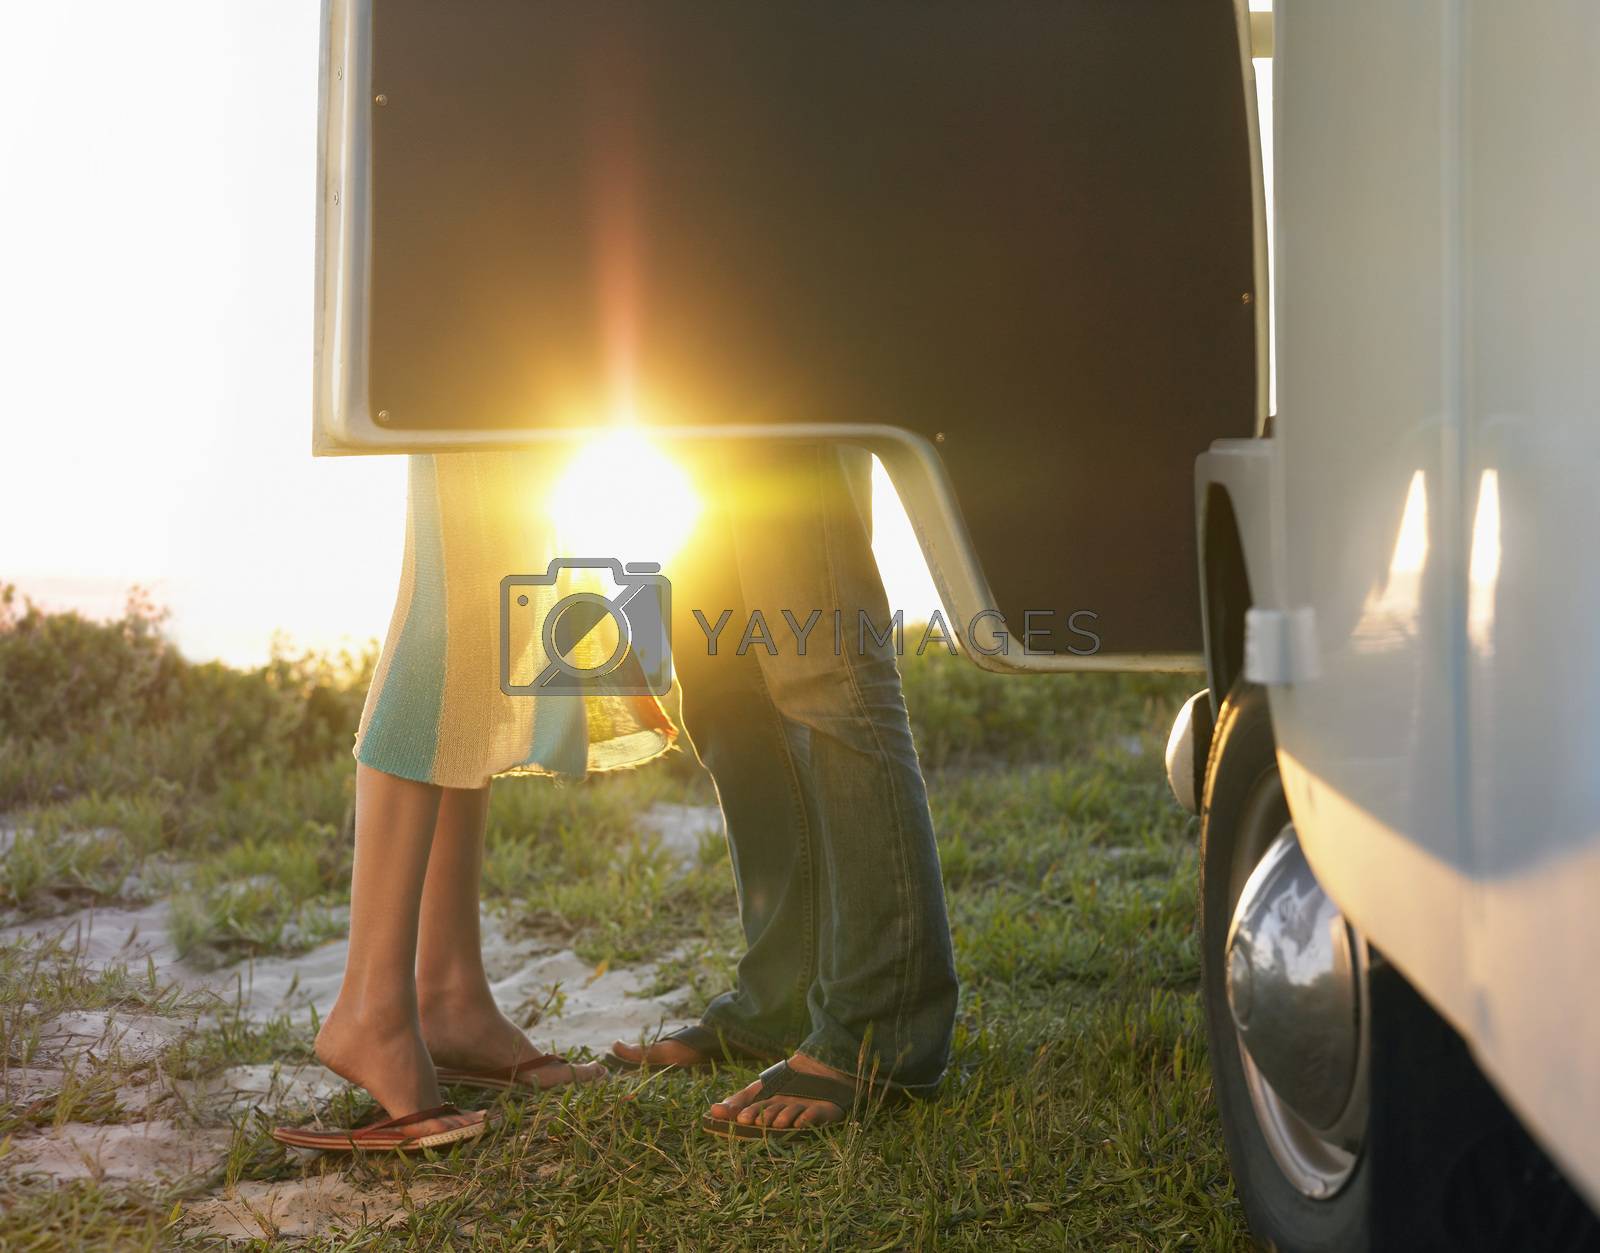 Royalty free image of Young couple face to face beside camper van low section by moodboard